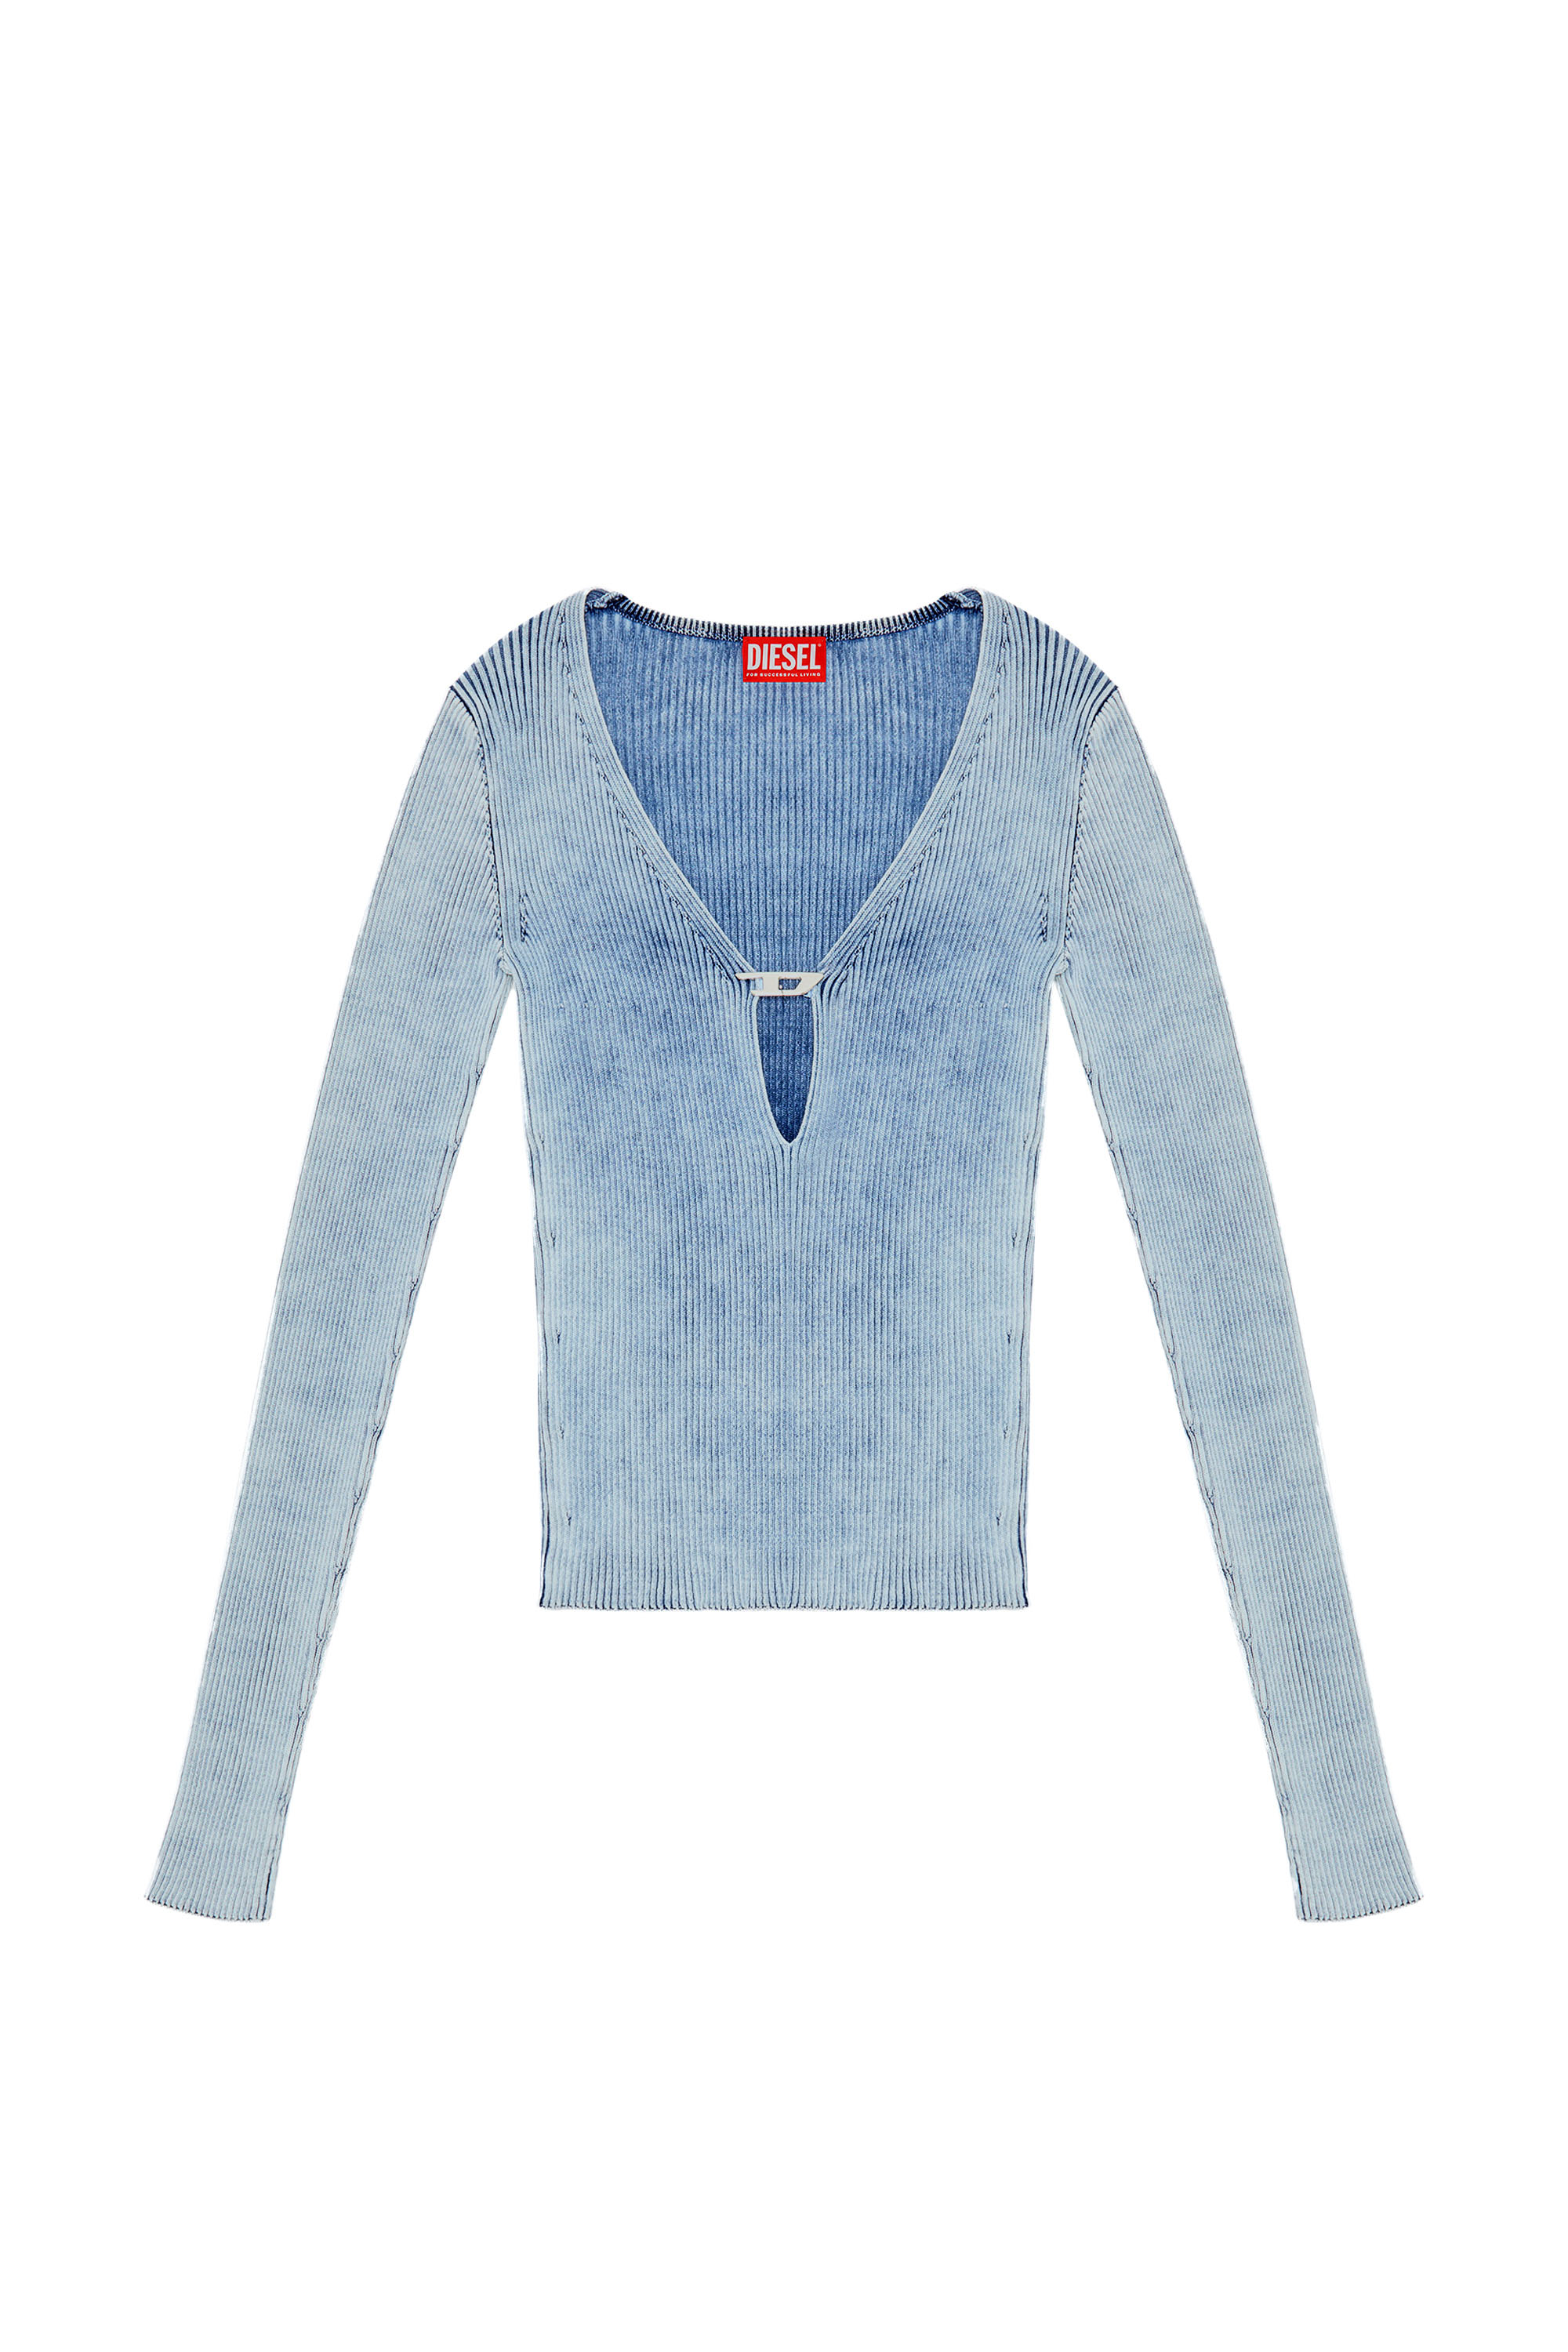 Diesel - M-TERI, Woman Cut-out top in indigo cotton knit in Blue - Image 4